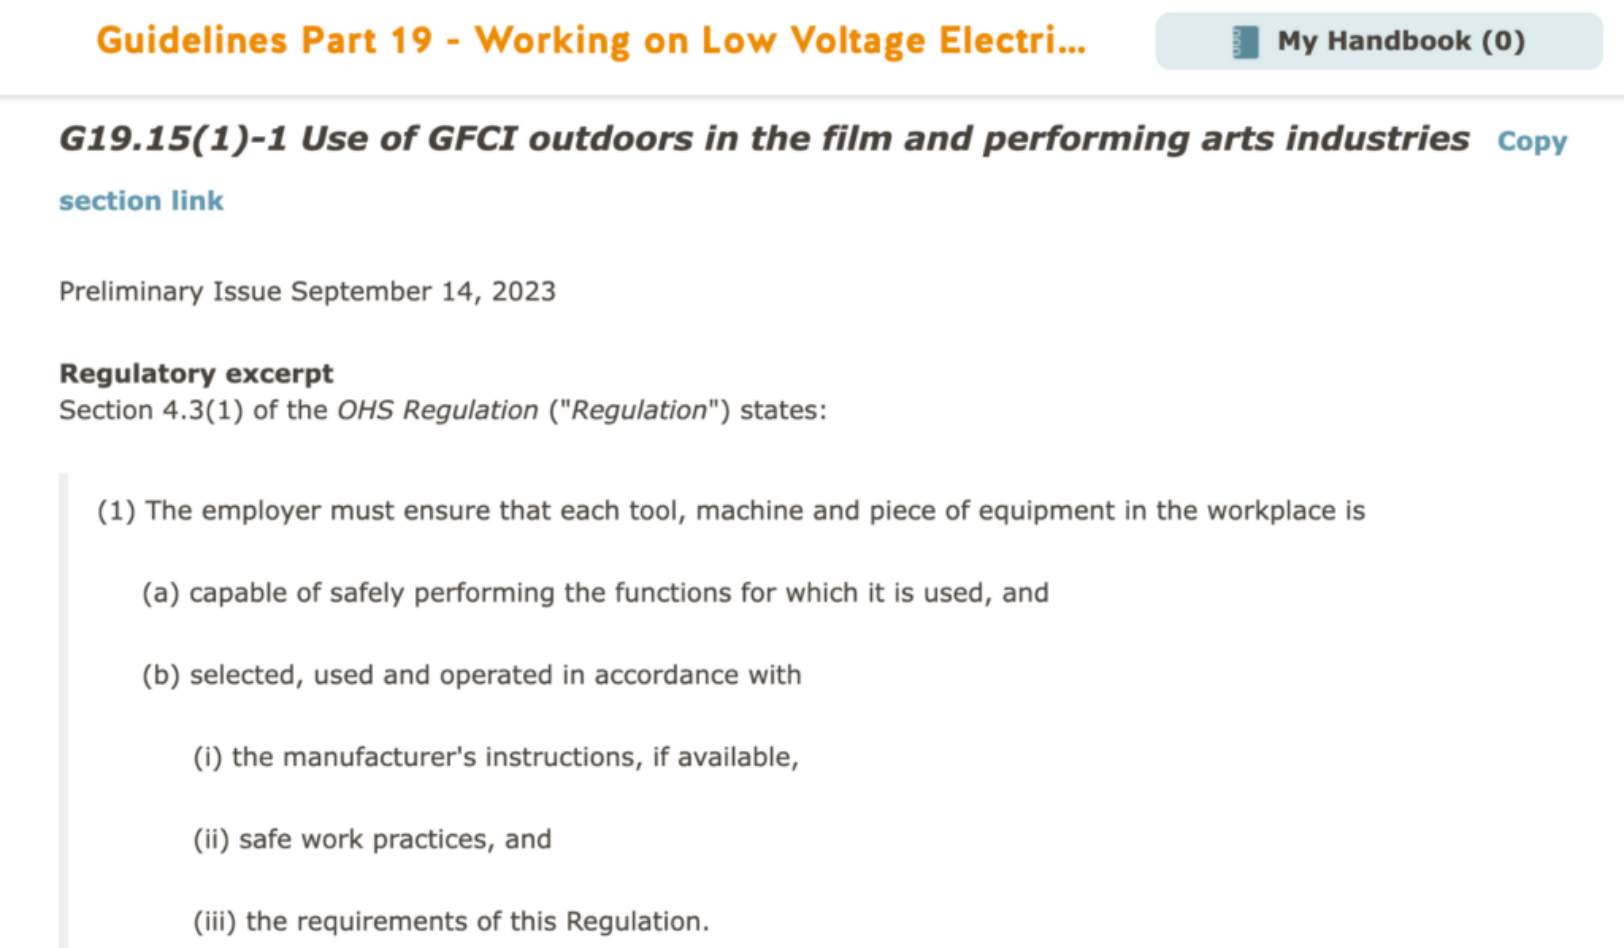 Use of GFCI outdoors in the film and performing arts industries